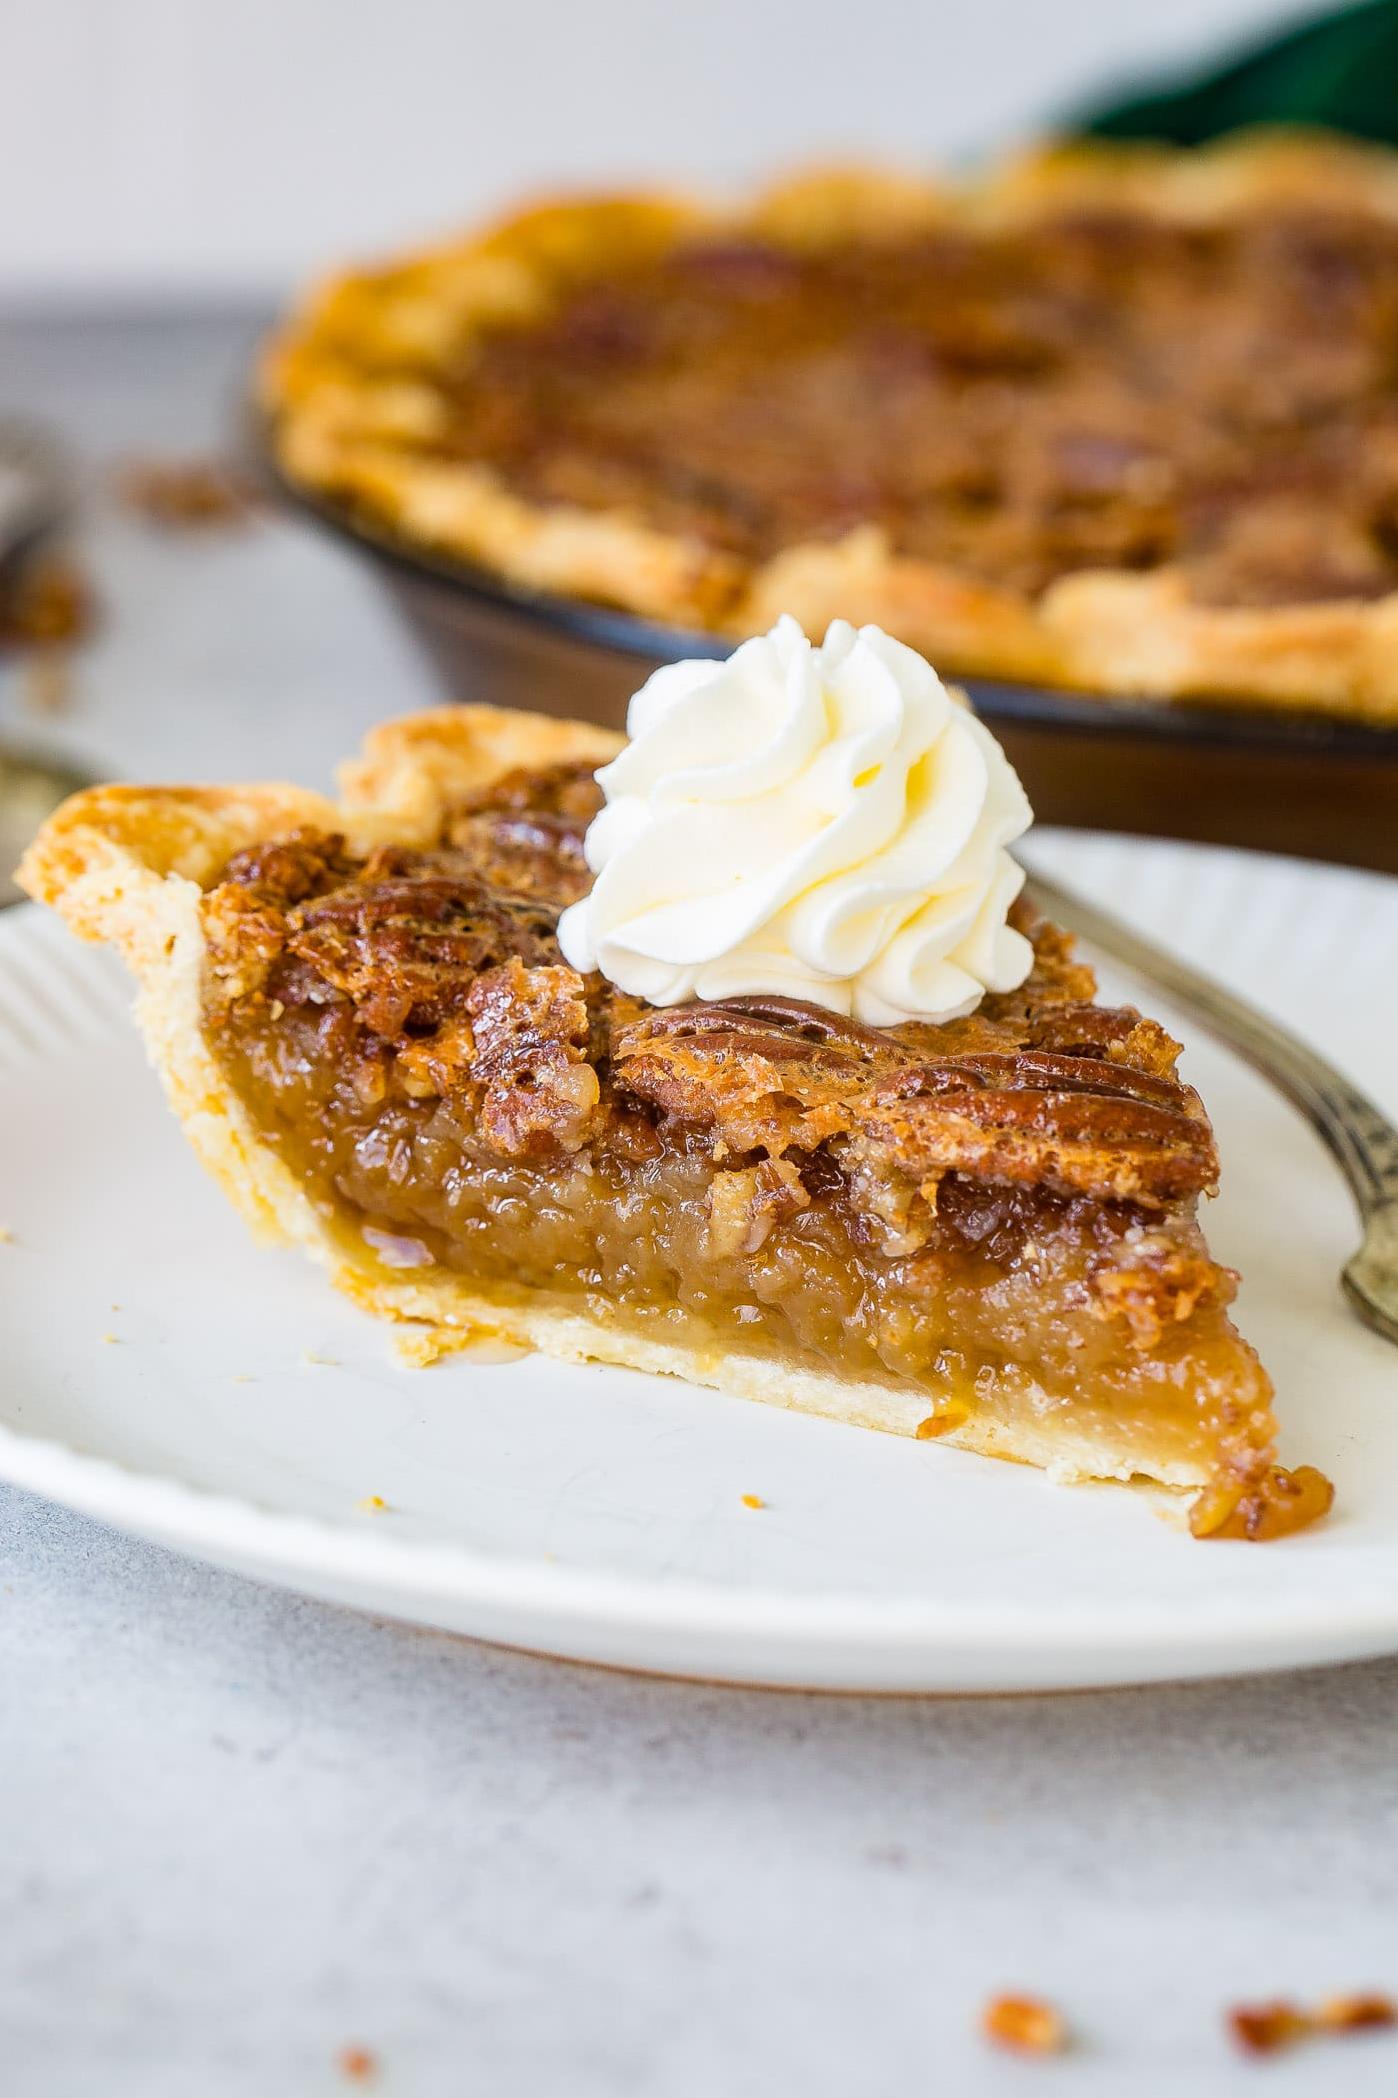  Pour this filling into your favorite pie crust and bake for the ultimate dessert.